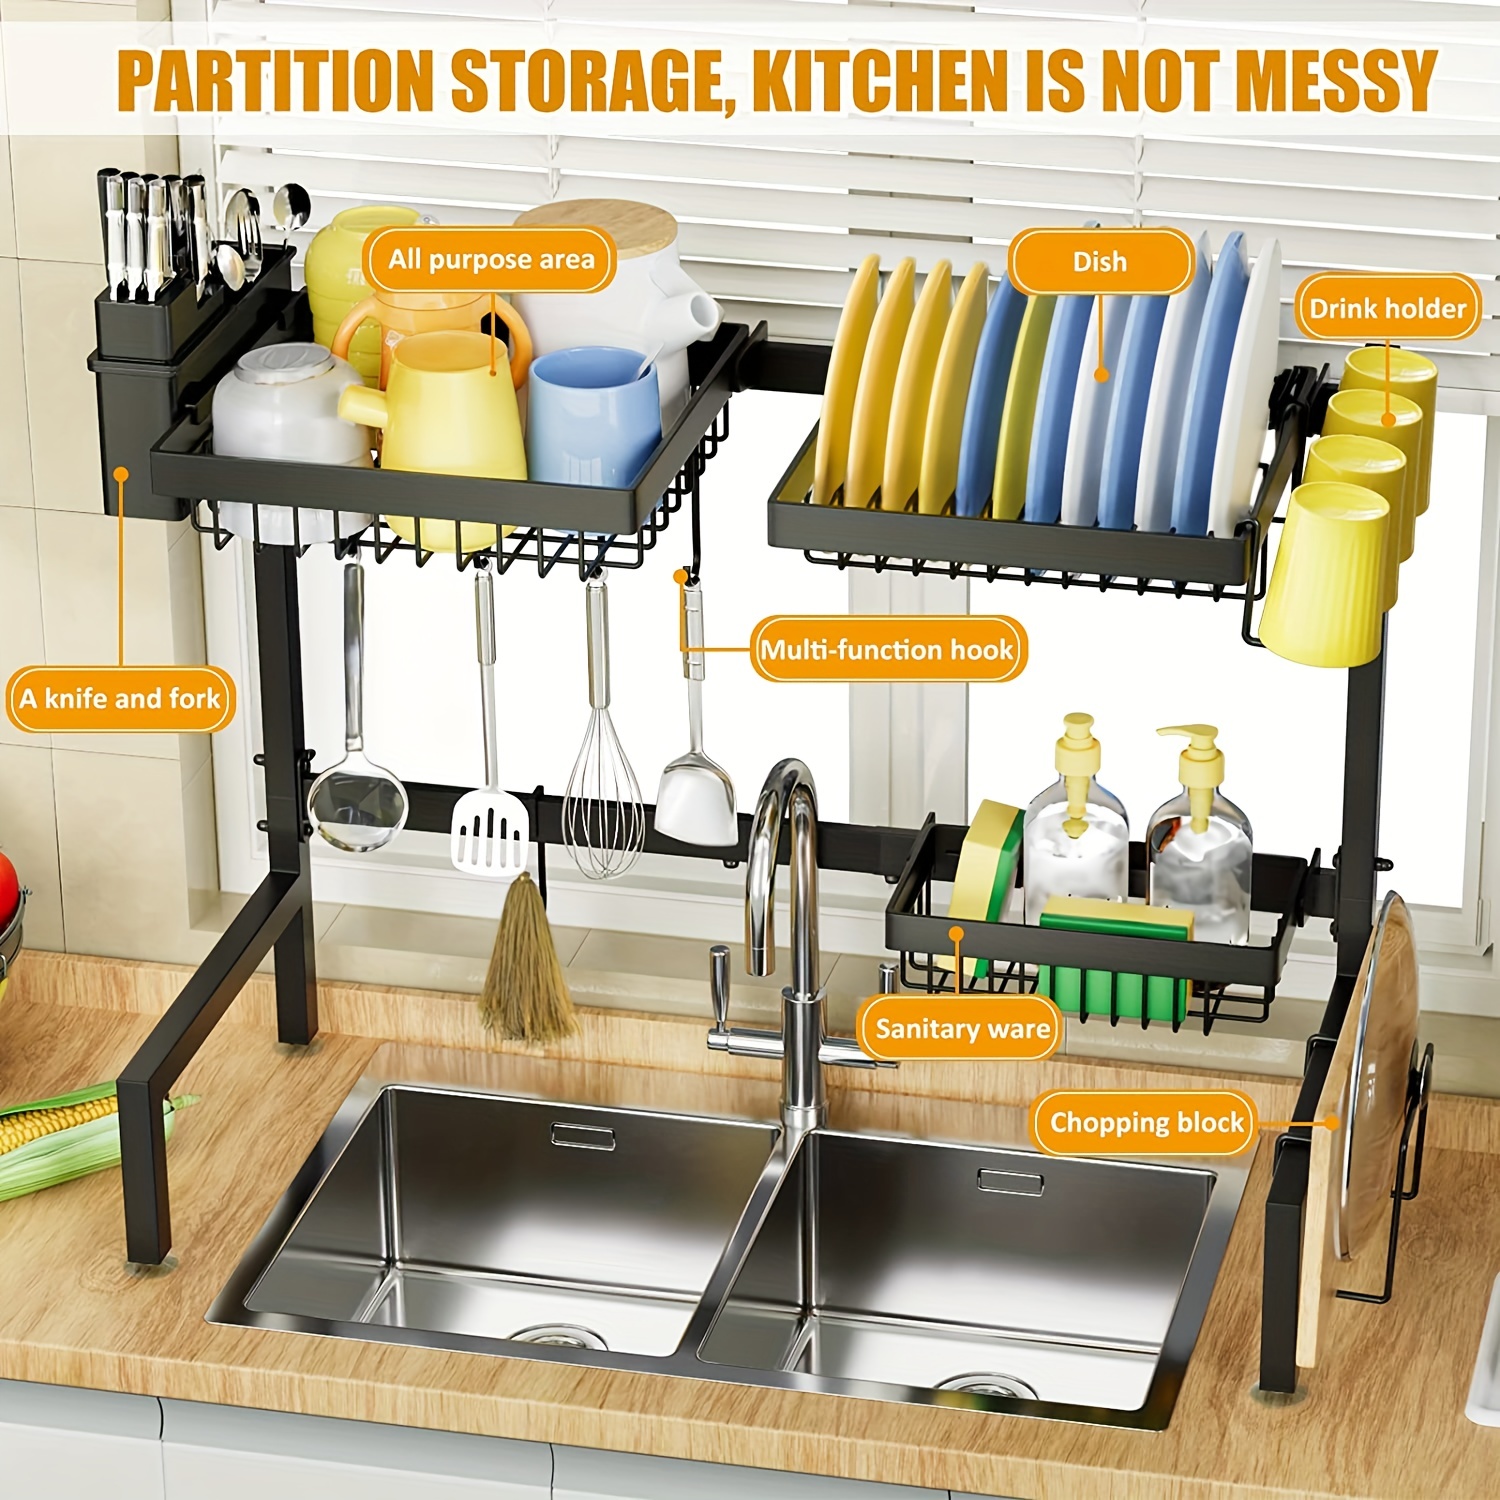  3-Tier Dish Drying Rack, Stainless Steel Dish Racks for  Kitchen Counter, Dish Drainers with Knife Holder, Hooks, Kitchen Supplies  Storage Shelf, with Drain Pan (63cm)